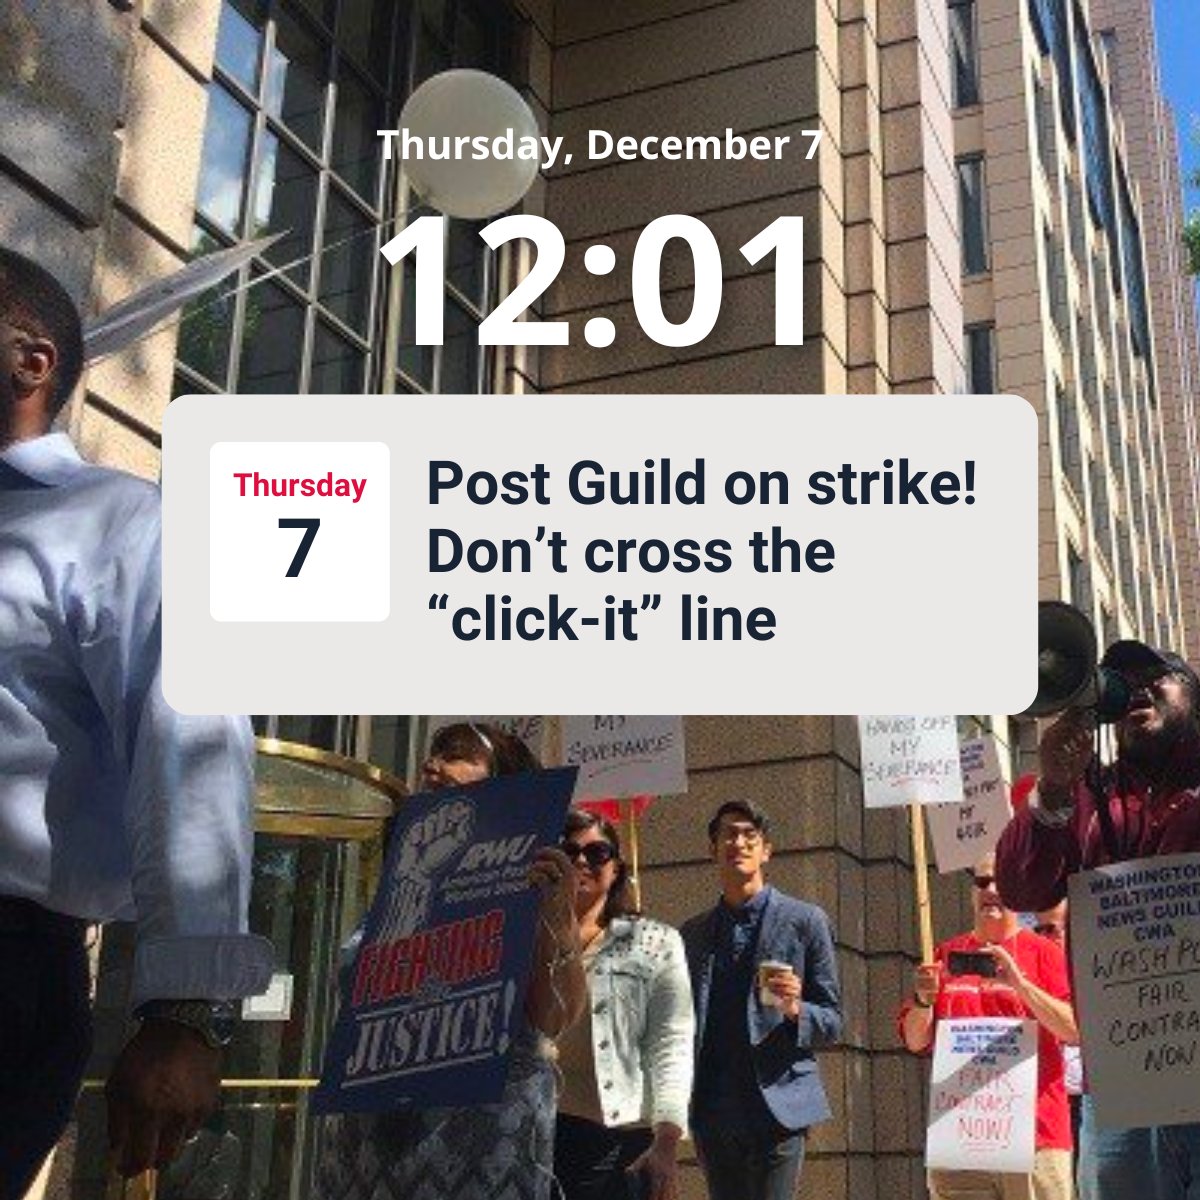 The @PostGuild is on strike today for unfair labor practices at @washingtonpost. Show your solidarity by not using or sharing the Post's online content today. Instead, send a letter to the publisher: actionnetwork.org/letters/worker…